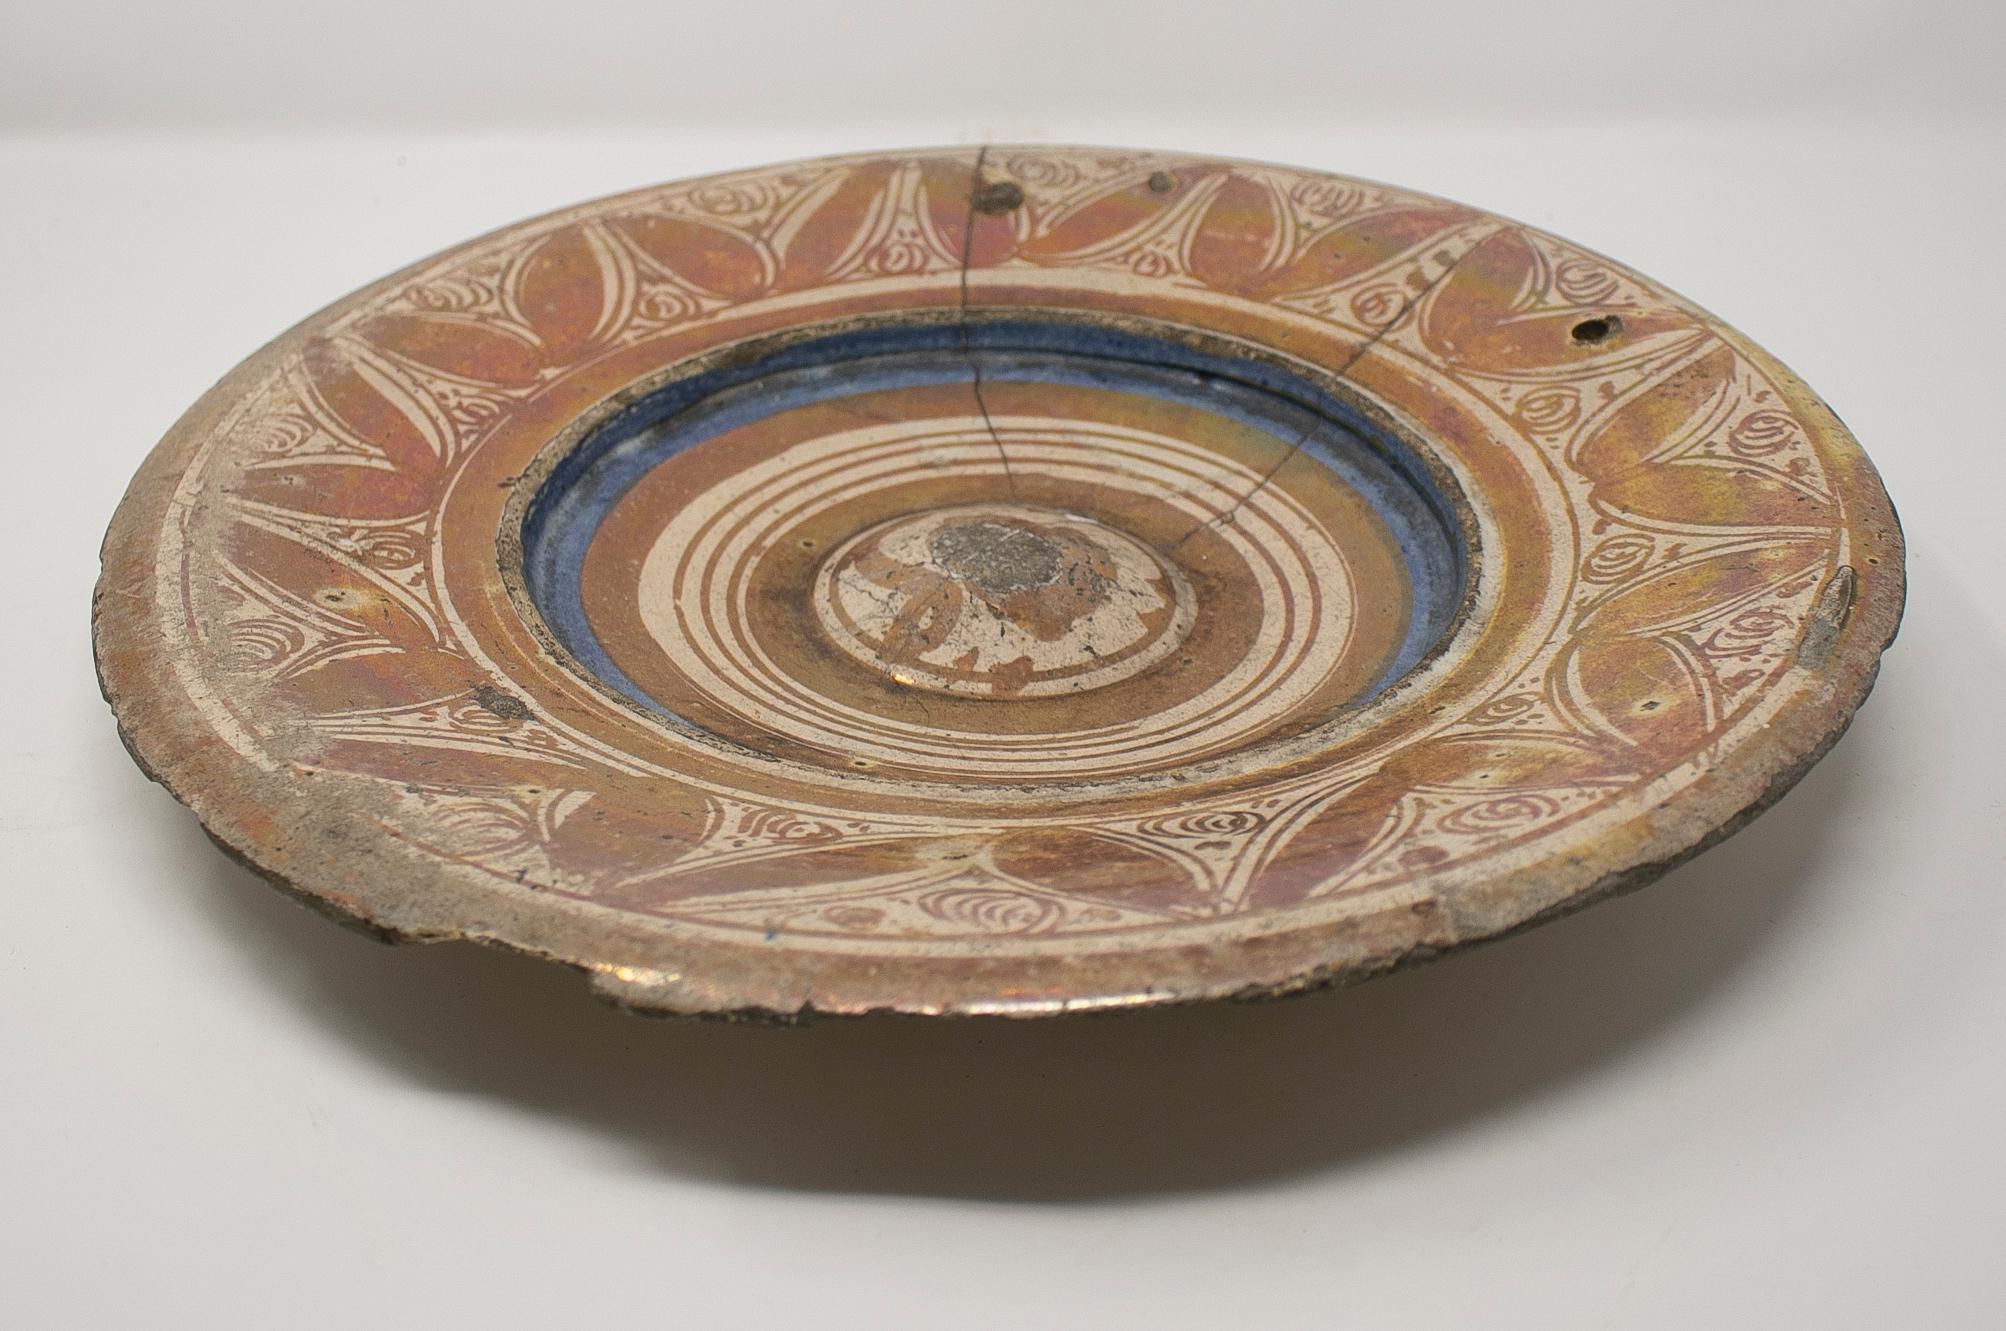 16th century Spanish Valencian Manises lusterware plate combining ceramics with metallic glaze.

It has been repaired with iron grapples.